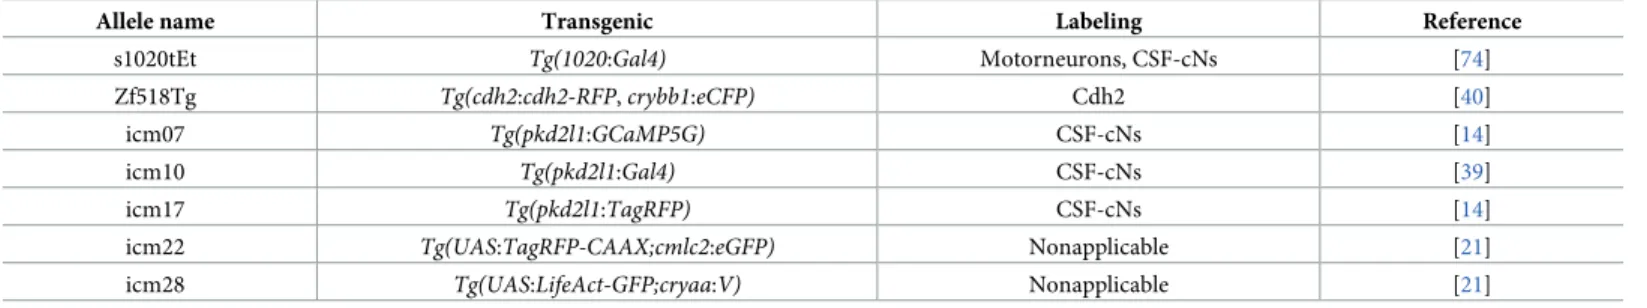 Table 1. Transgenic lines used in our study.